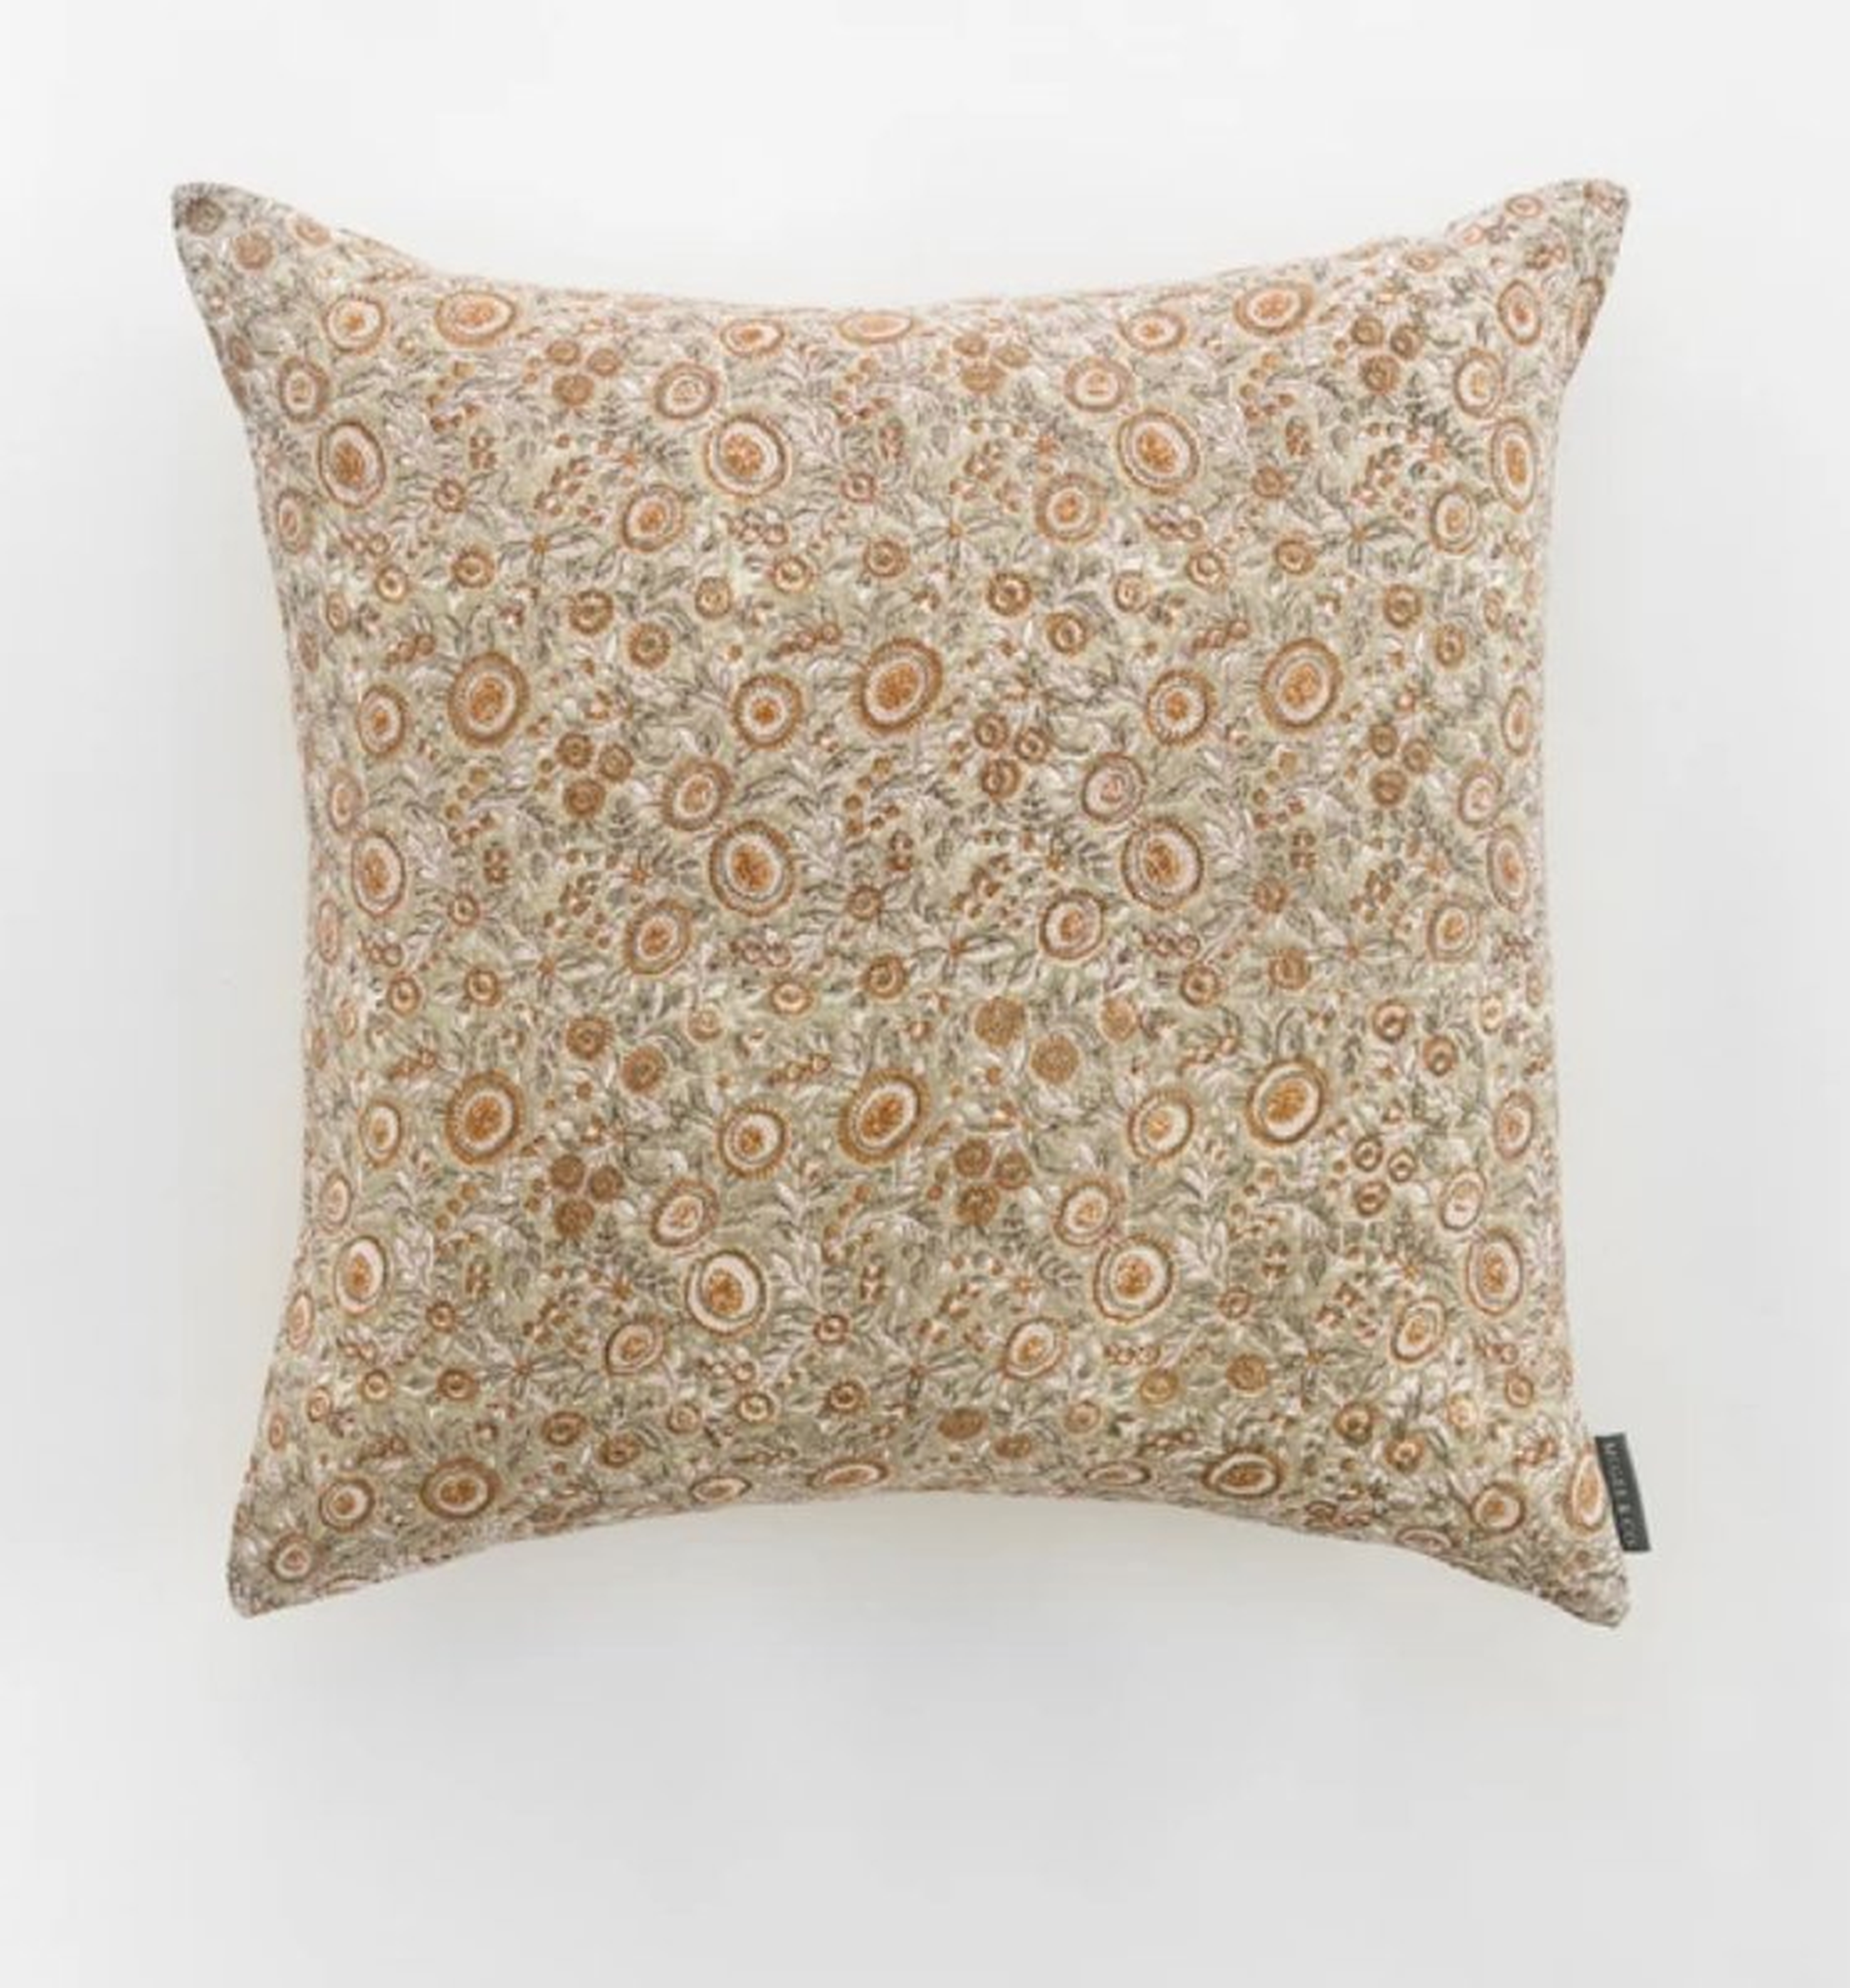 Anora Block Print Pillow Cover - McGee & Co.